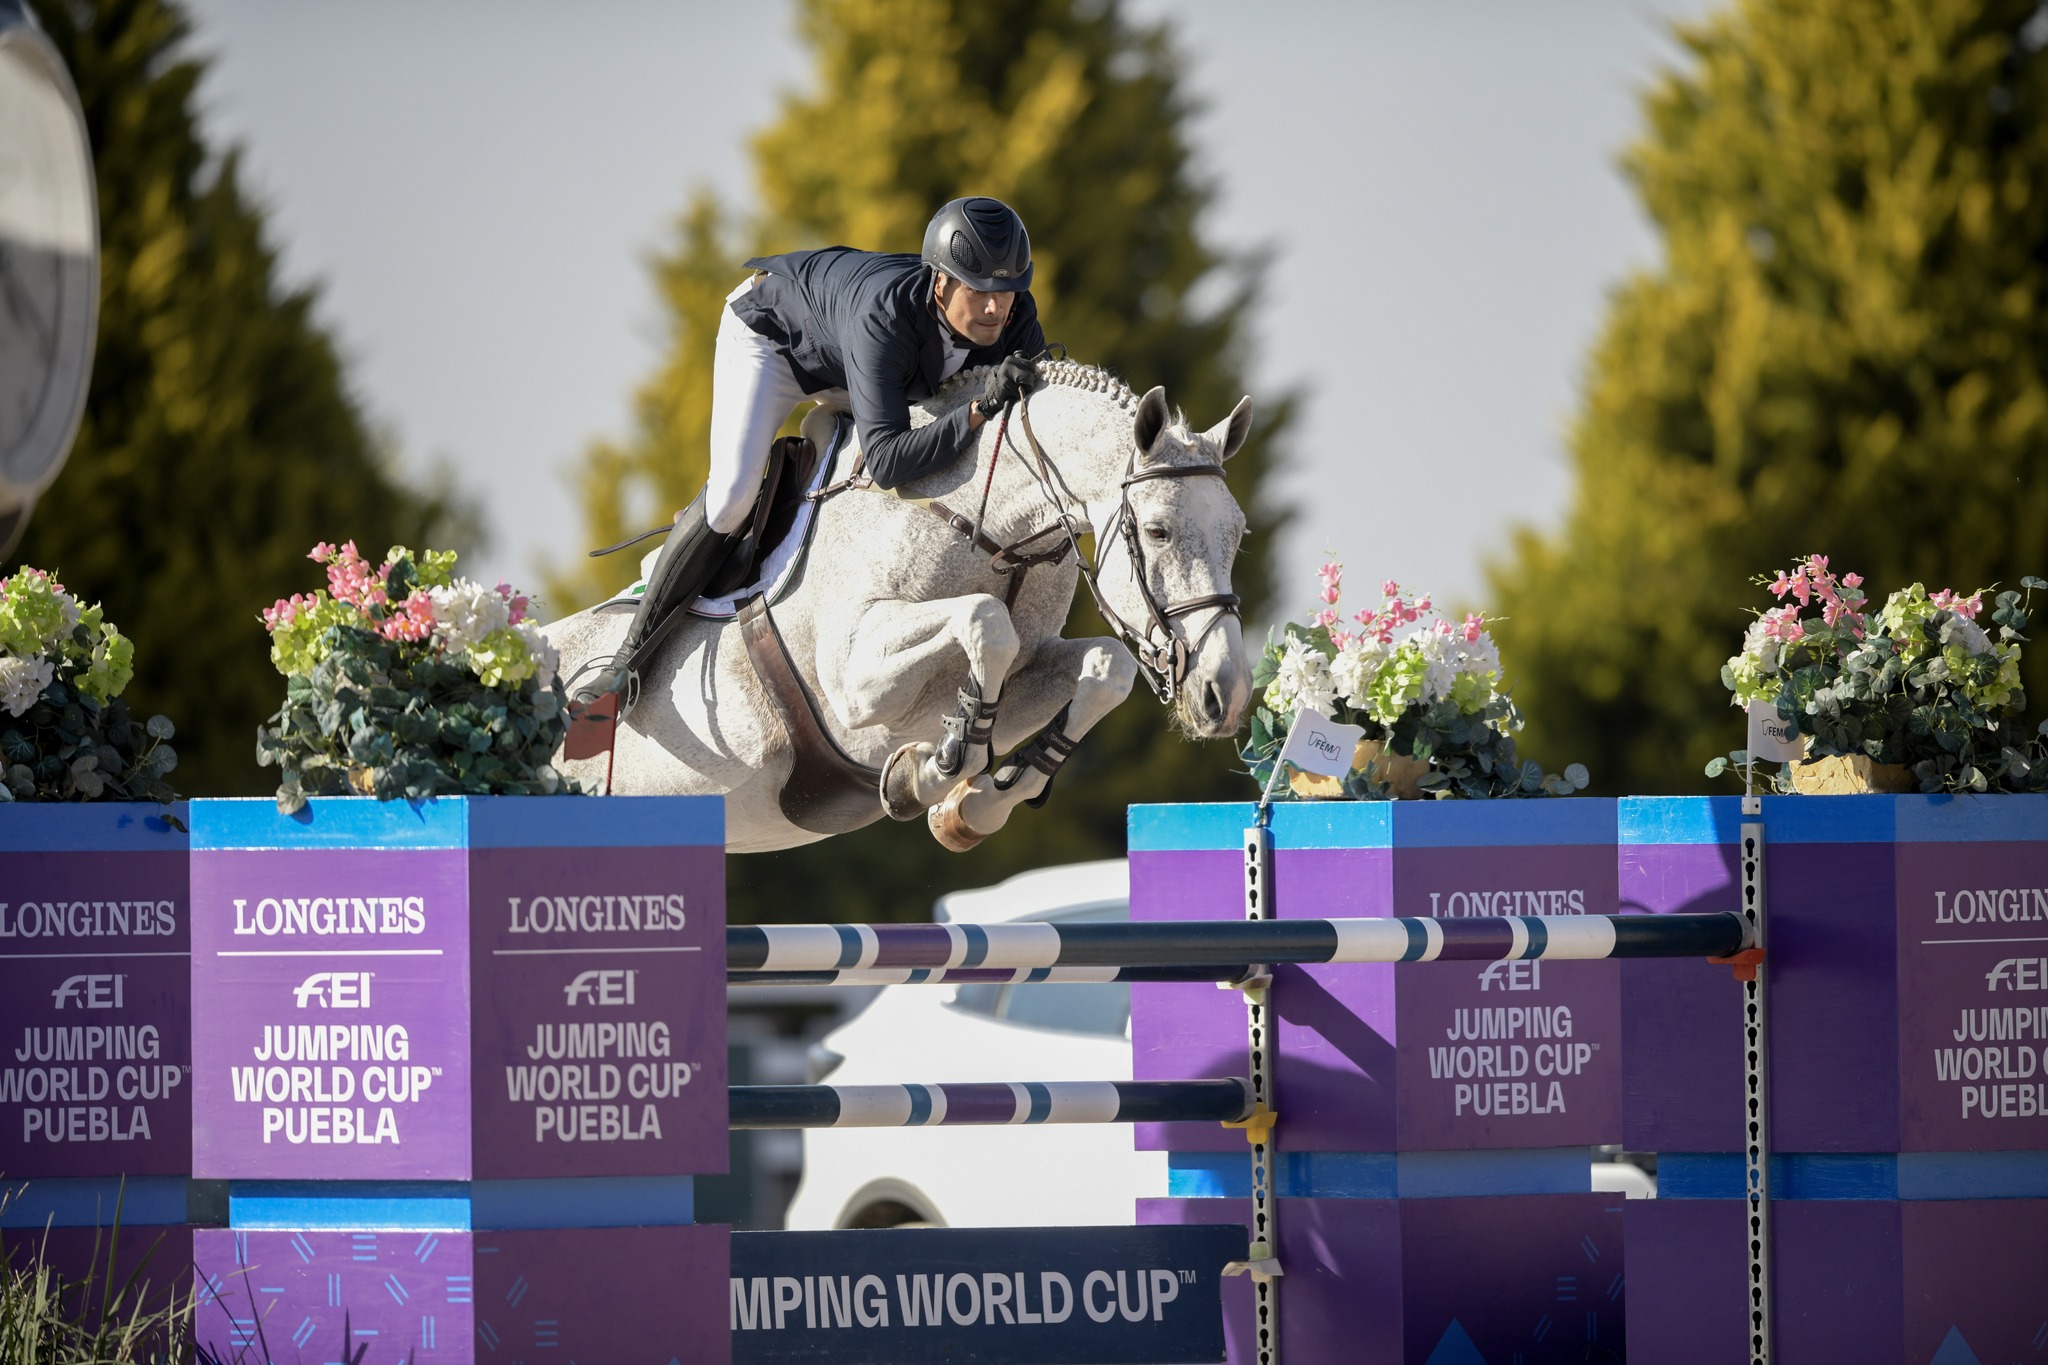 World Cup Jumping Leagues wrapped up around the globe...